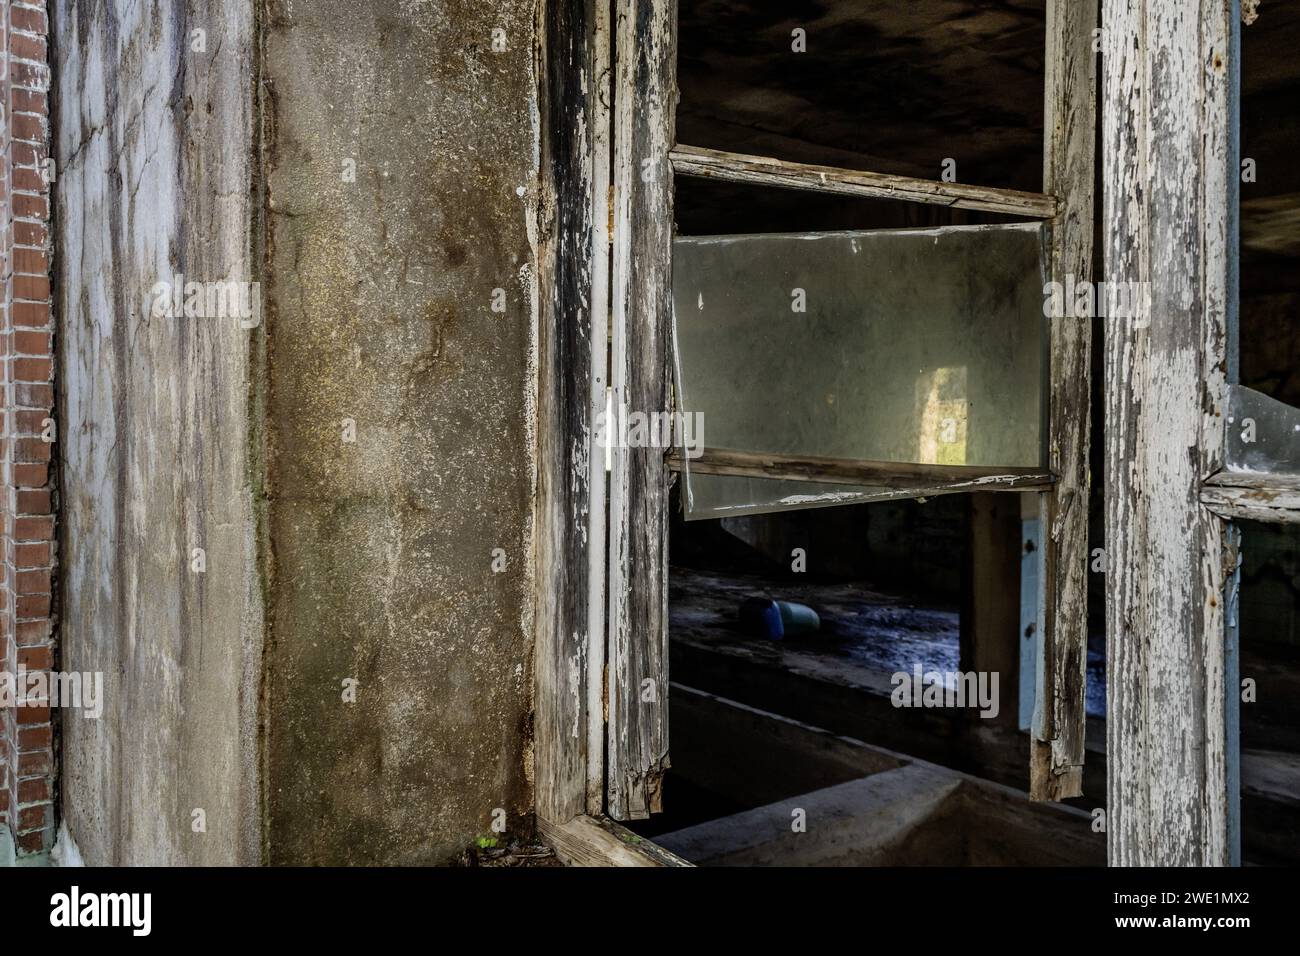 An old, rickety window of an old, abandoned building Stock Photo